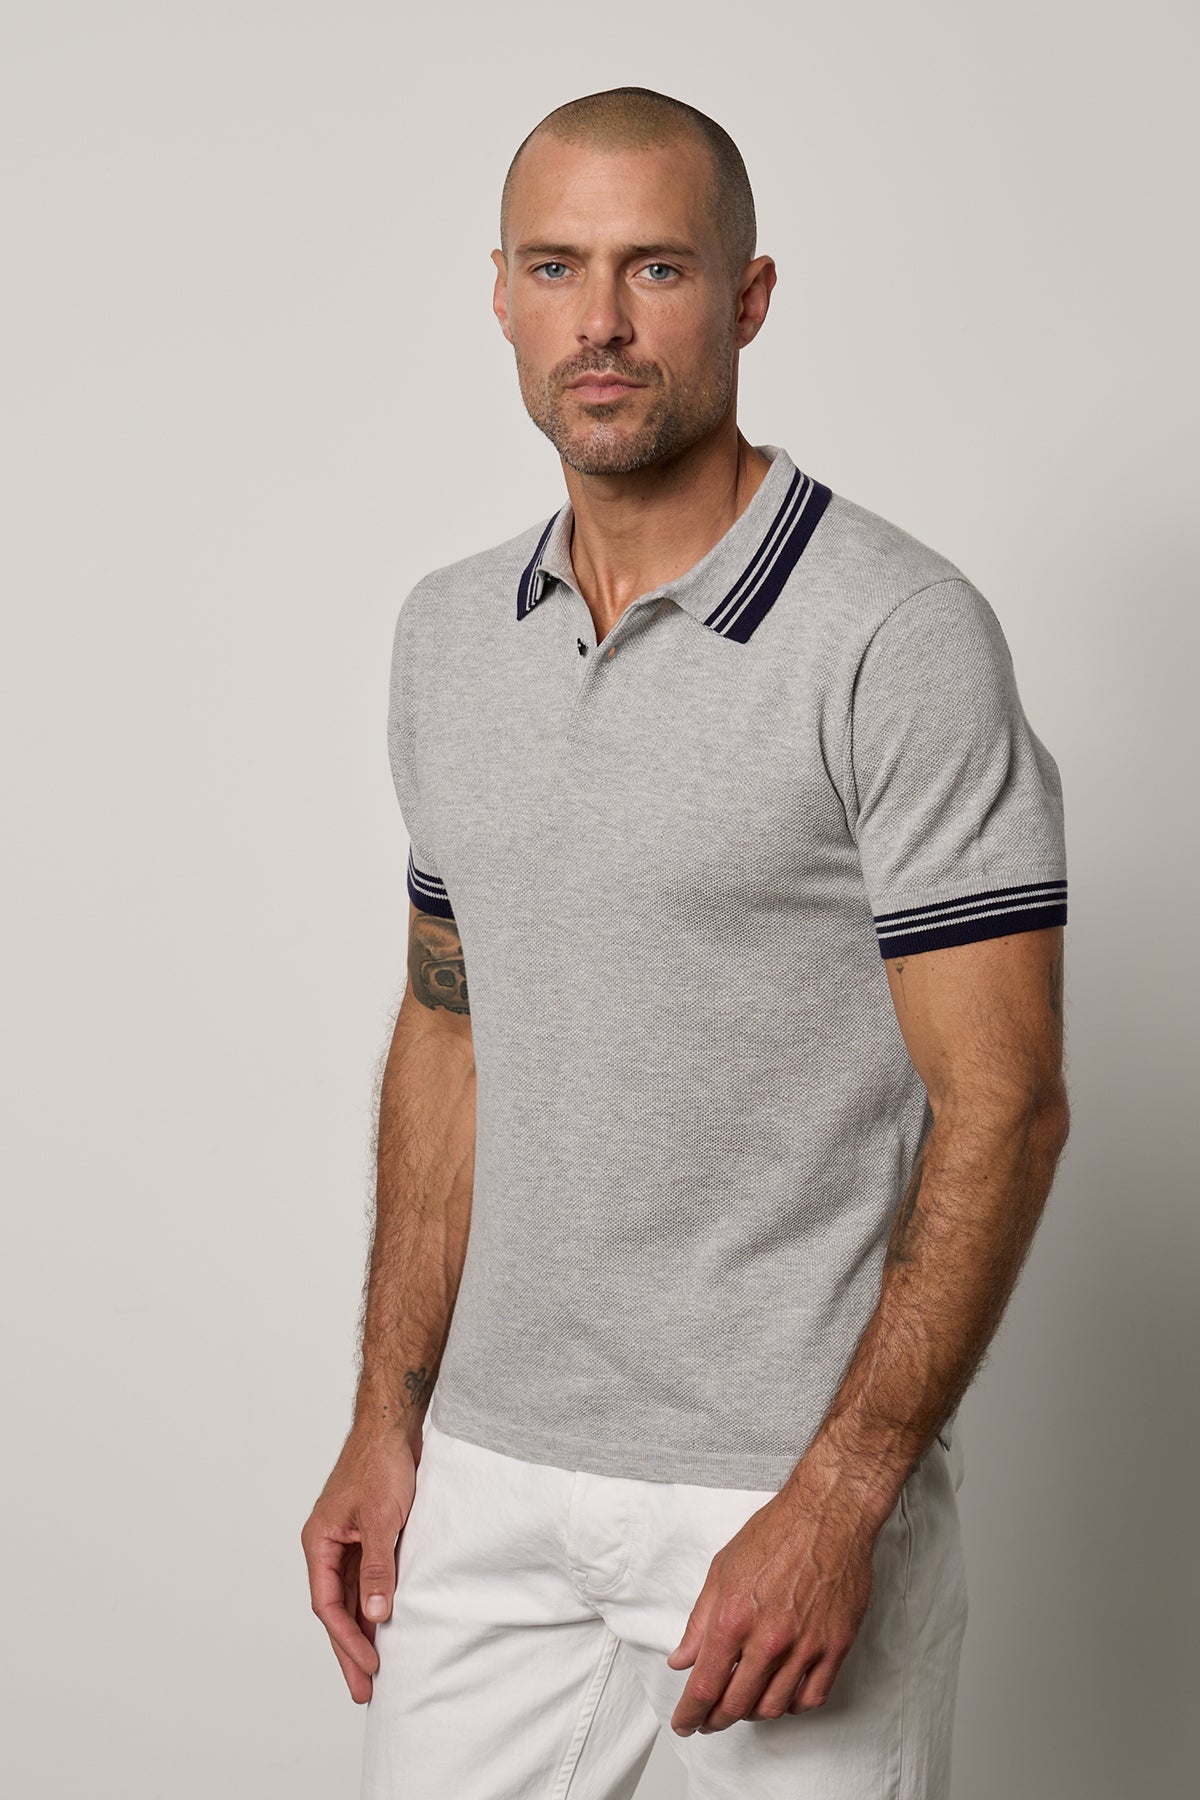   A man wearing a Velvet by Graham & Spencer FINLEY PIQUE POLO, featuring a textured fine ribbing and classic design, is seen in white pants. 